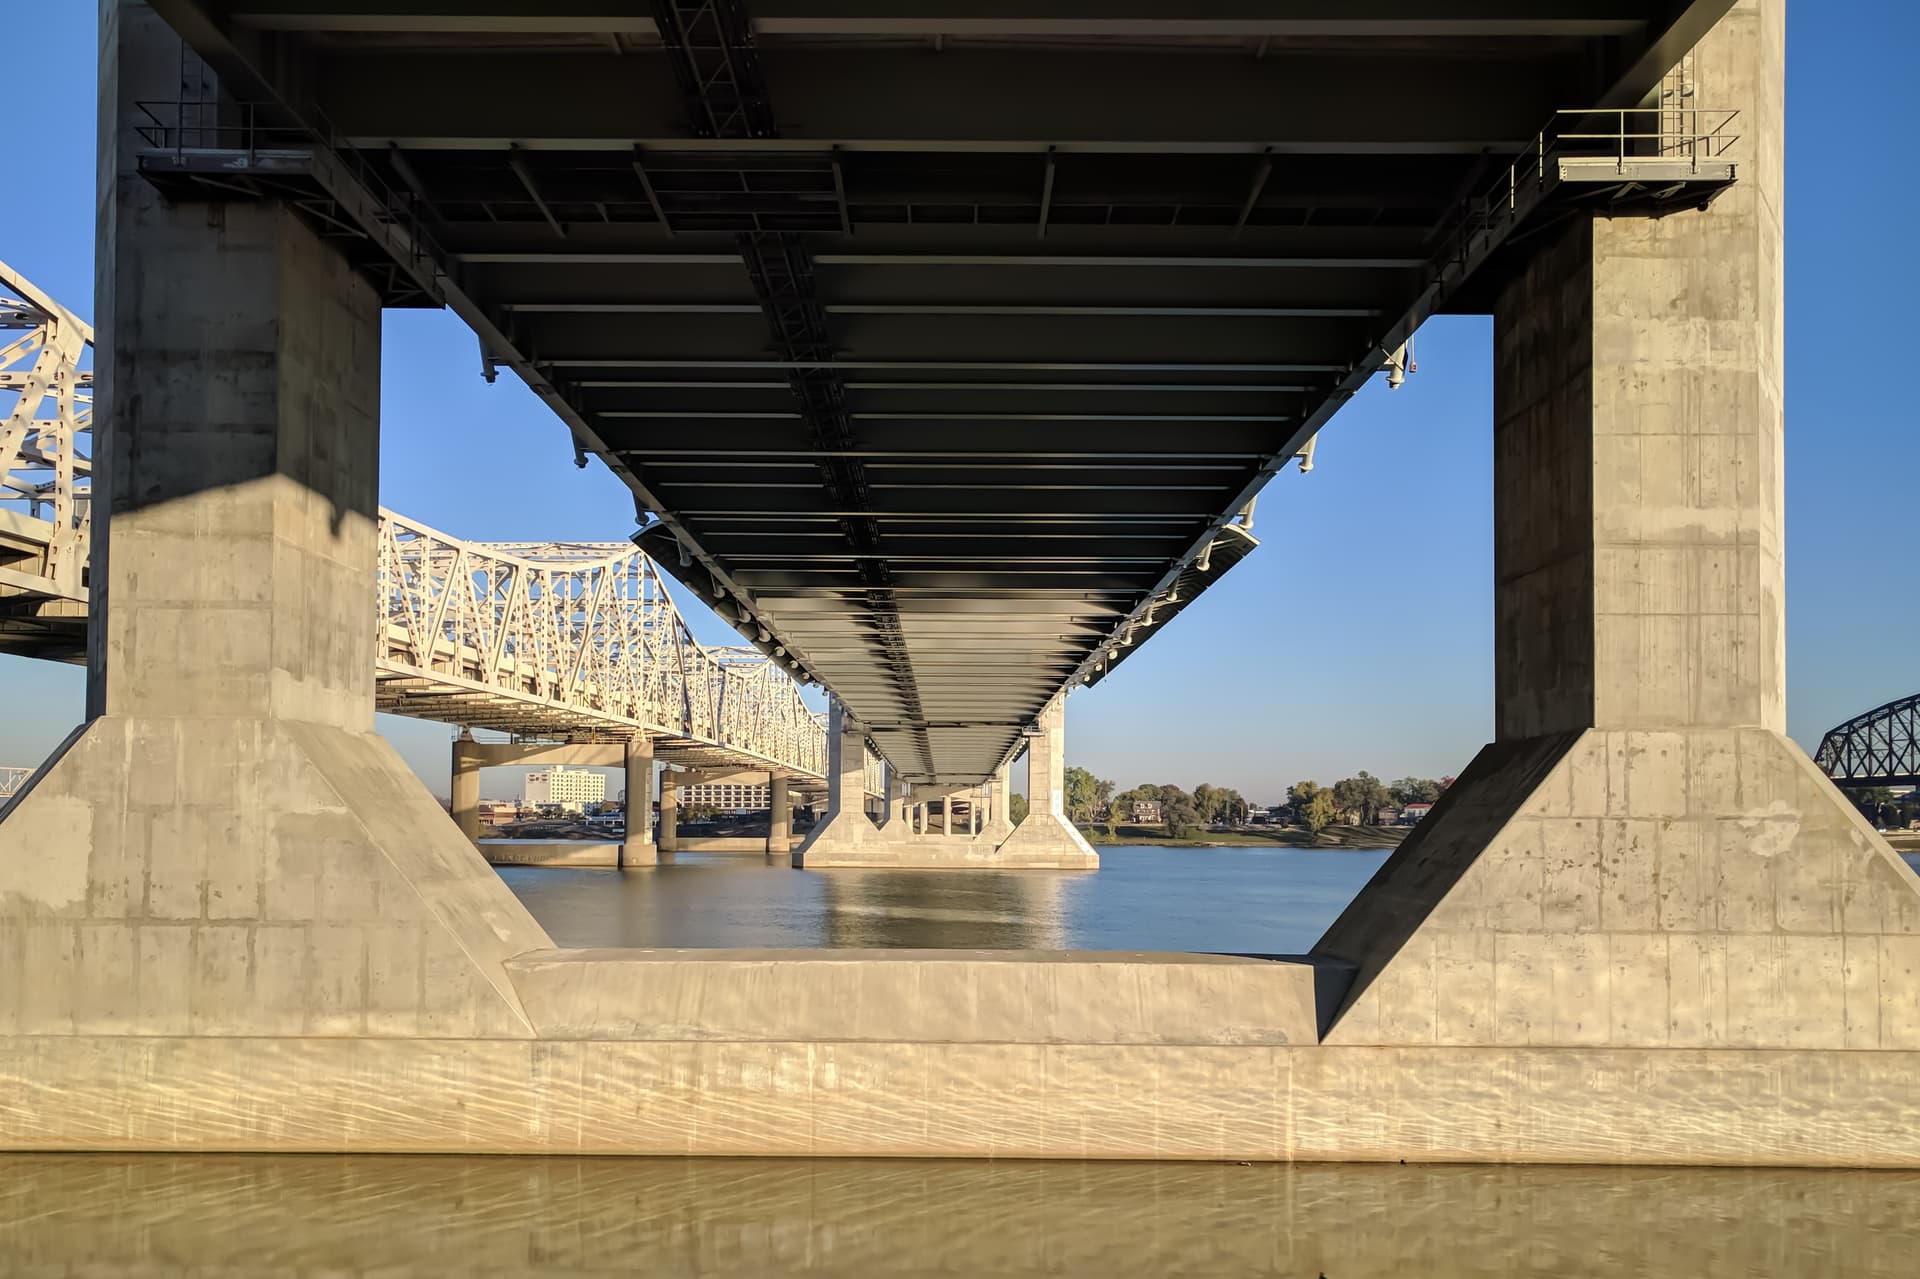 Looking towards Indiana across the Ohio River from underneath a bridge. The shot is framed by the bridge's concrete pylons, which regularly recede into the distance.